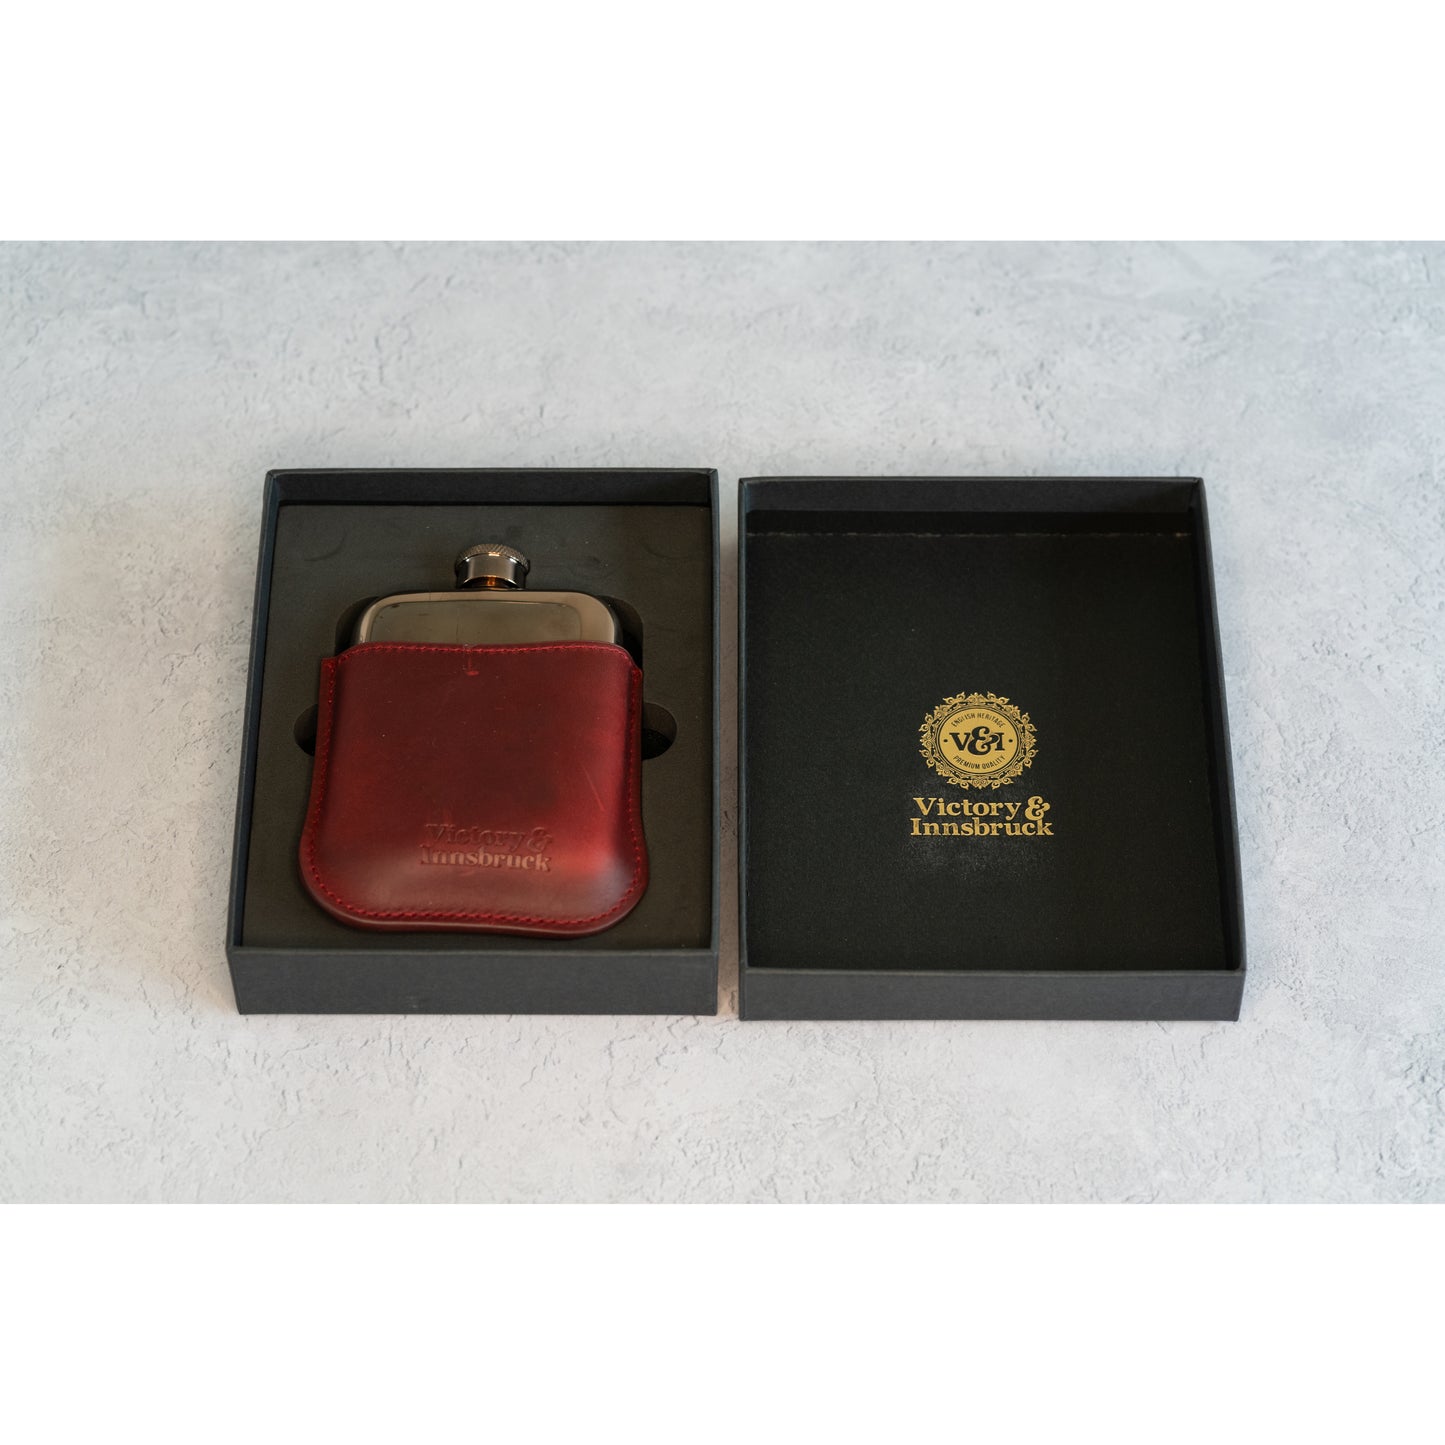 Full Grain Leather Cased Hip Flask | 3/4 Burgundy Leather | Copper Flask